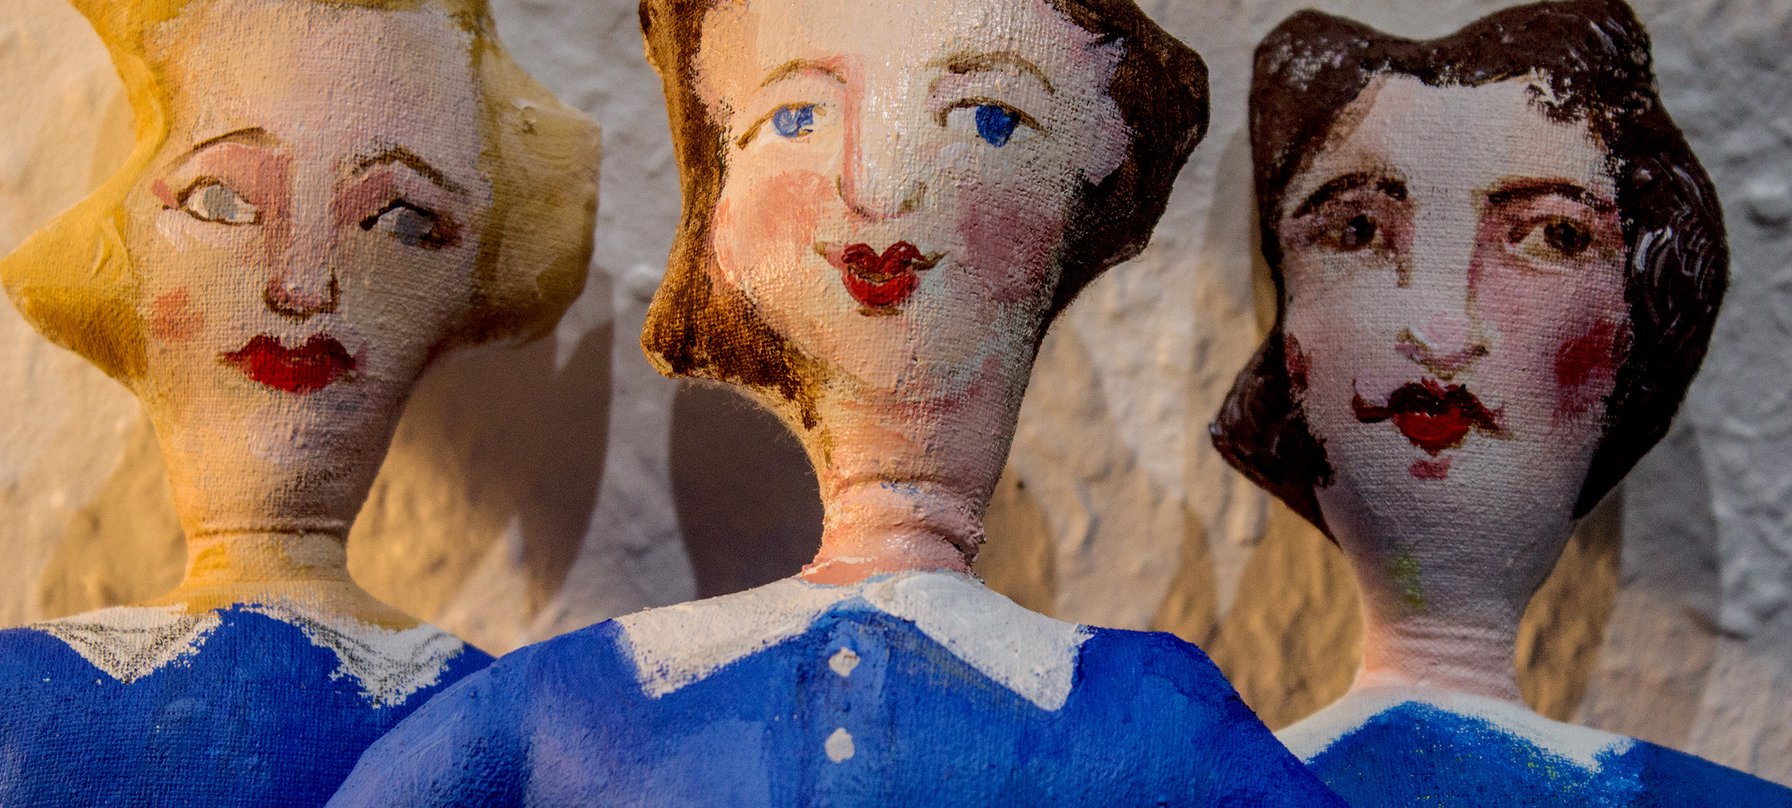 A photo of Grace Garton's work featuring three textile figures painted with blue dresses and 1940's-style feminine hair-dos. The figures all have painted faces with red cheeks and red lipstick. Credit Grace Garton.